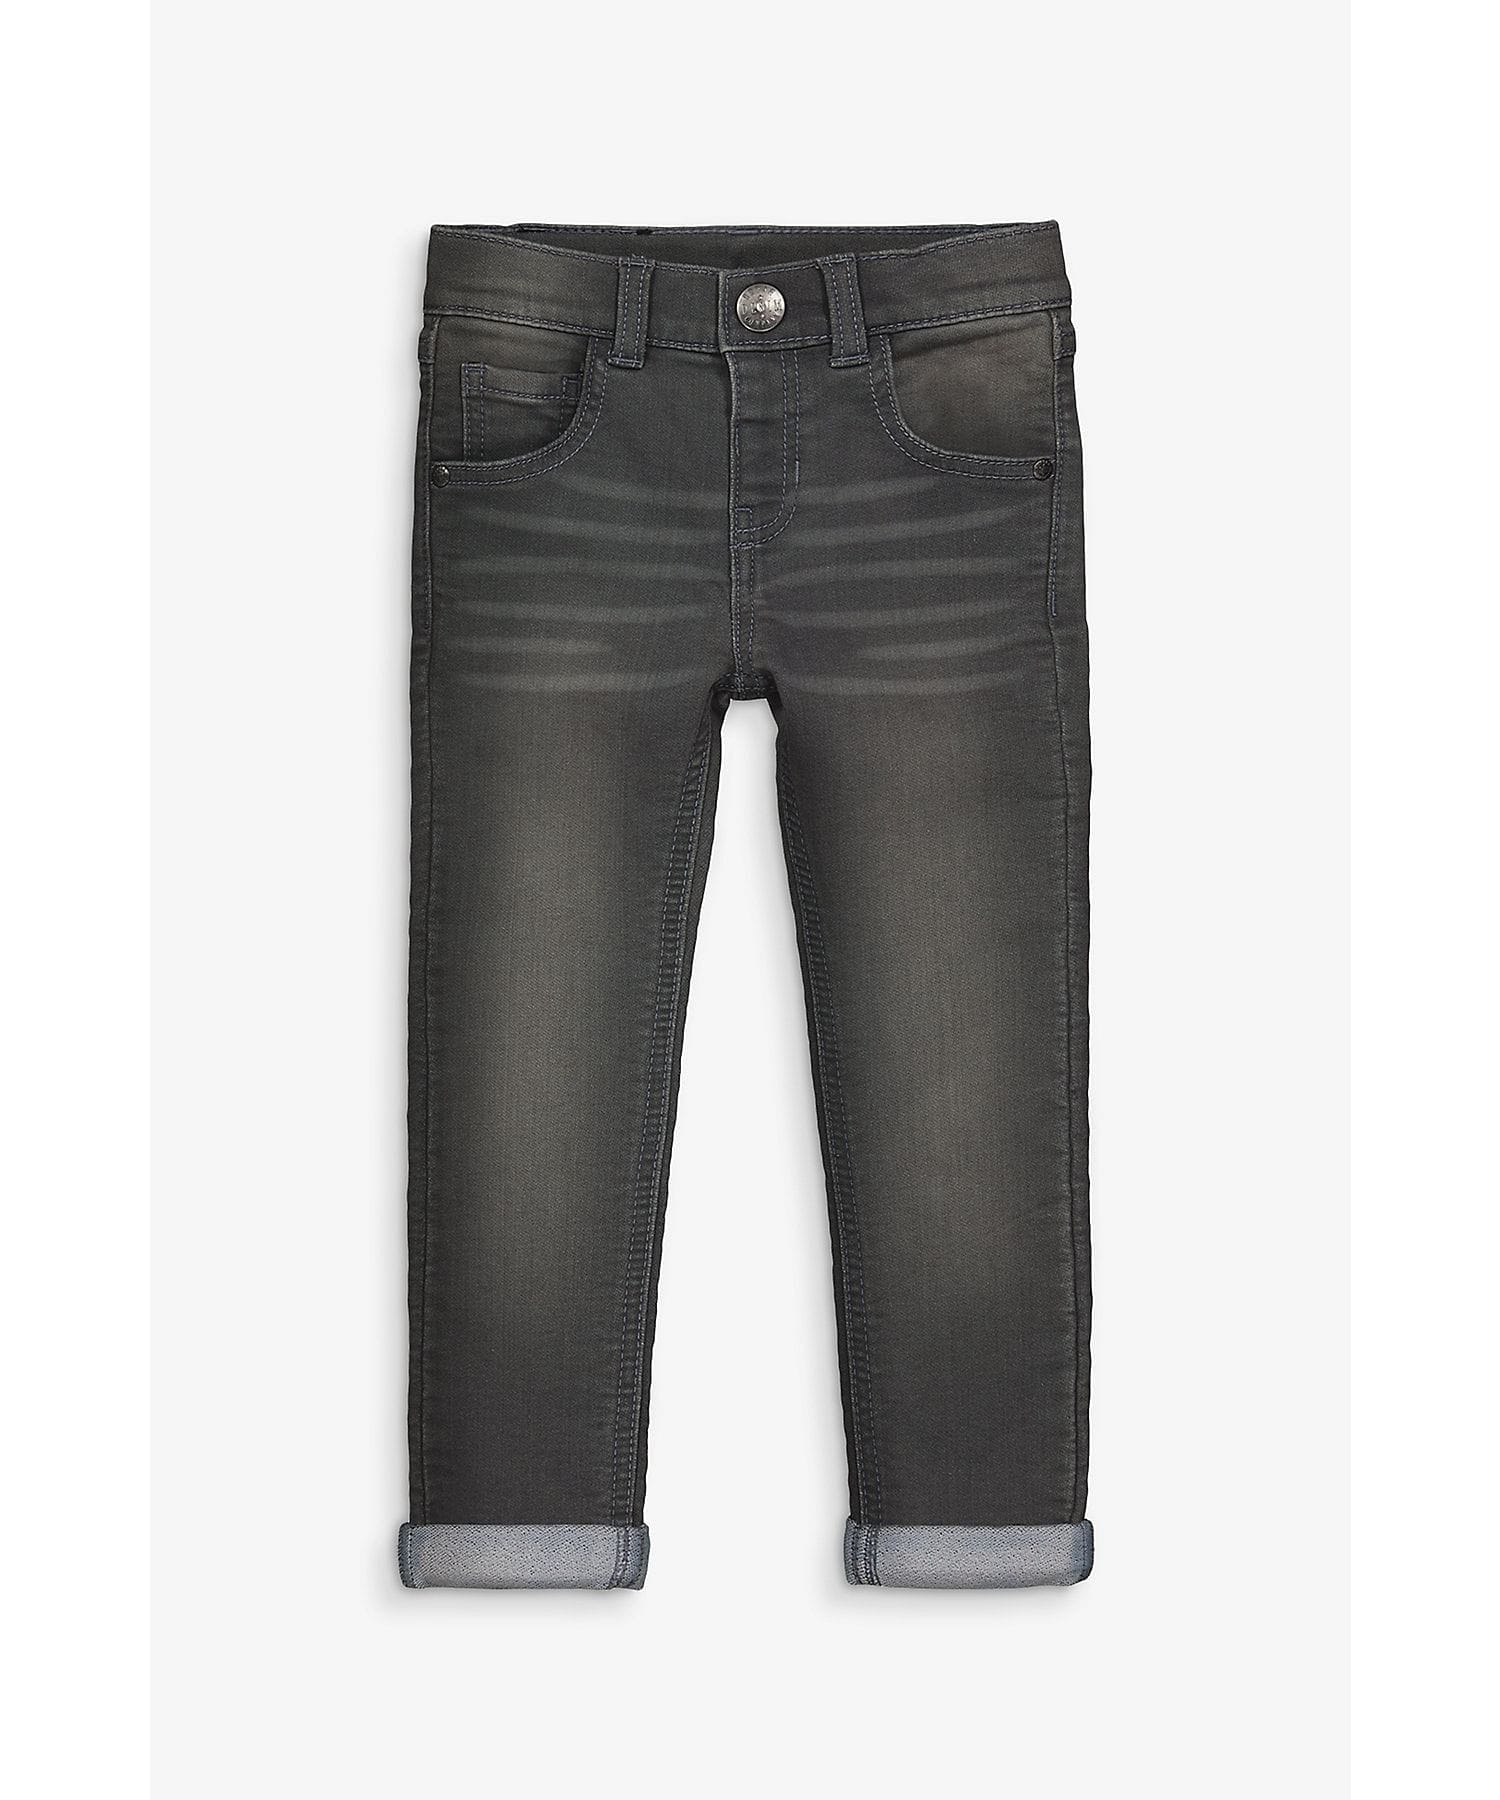 Mothercare | Mothercare Boys Jeans -Black 0